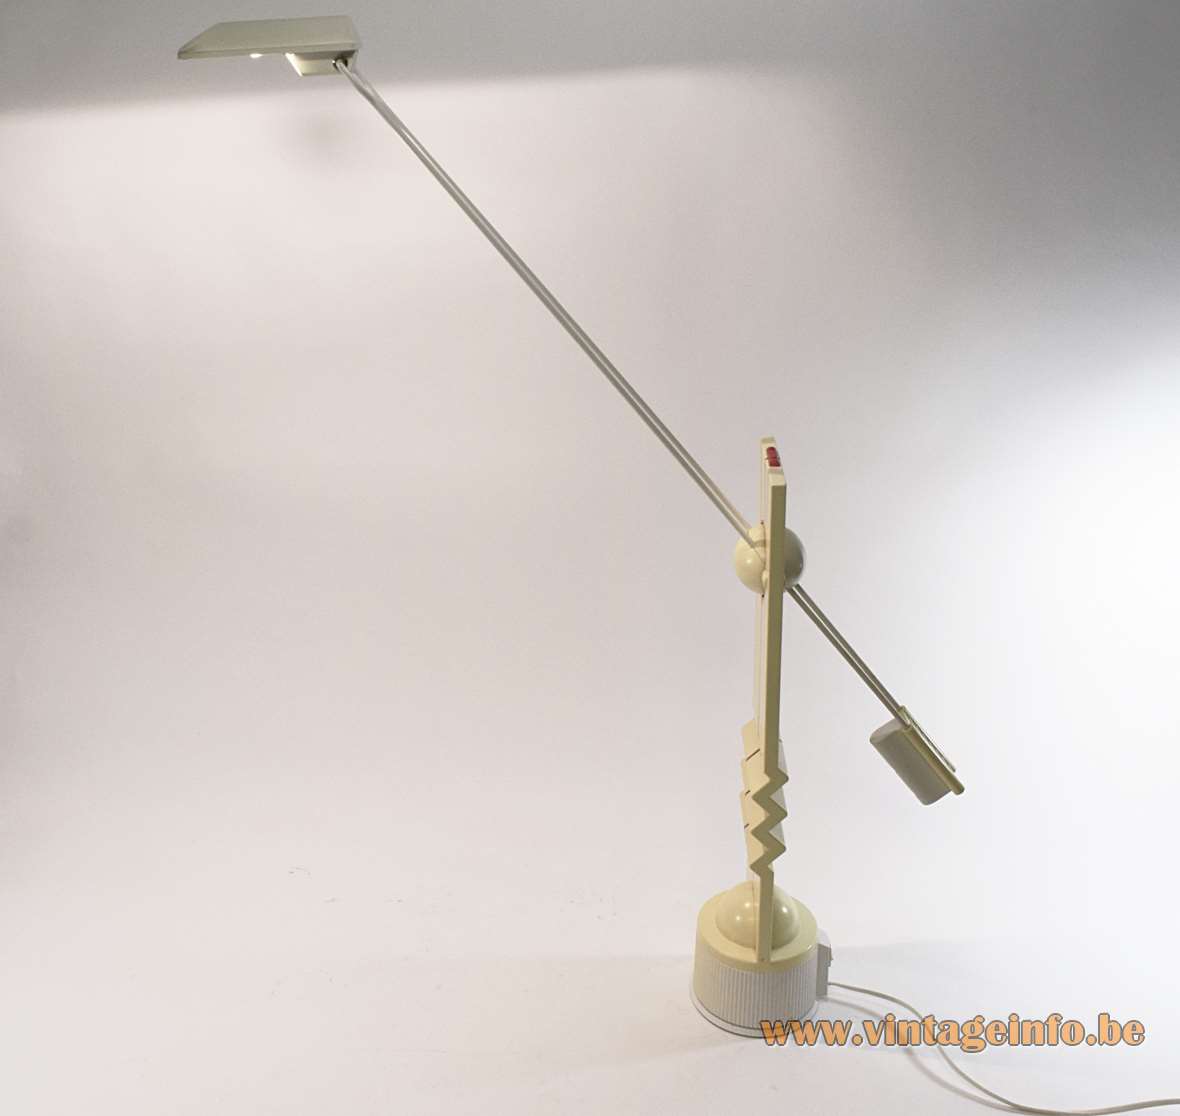 Memphis style zigzag desk lamp white & red plastic base & lampshade long rods Ettore Sottsass 1980s